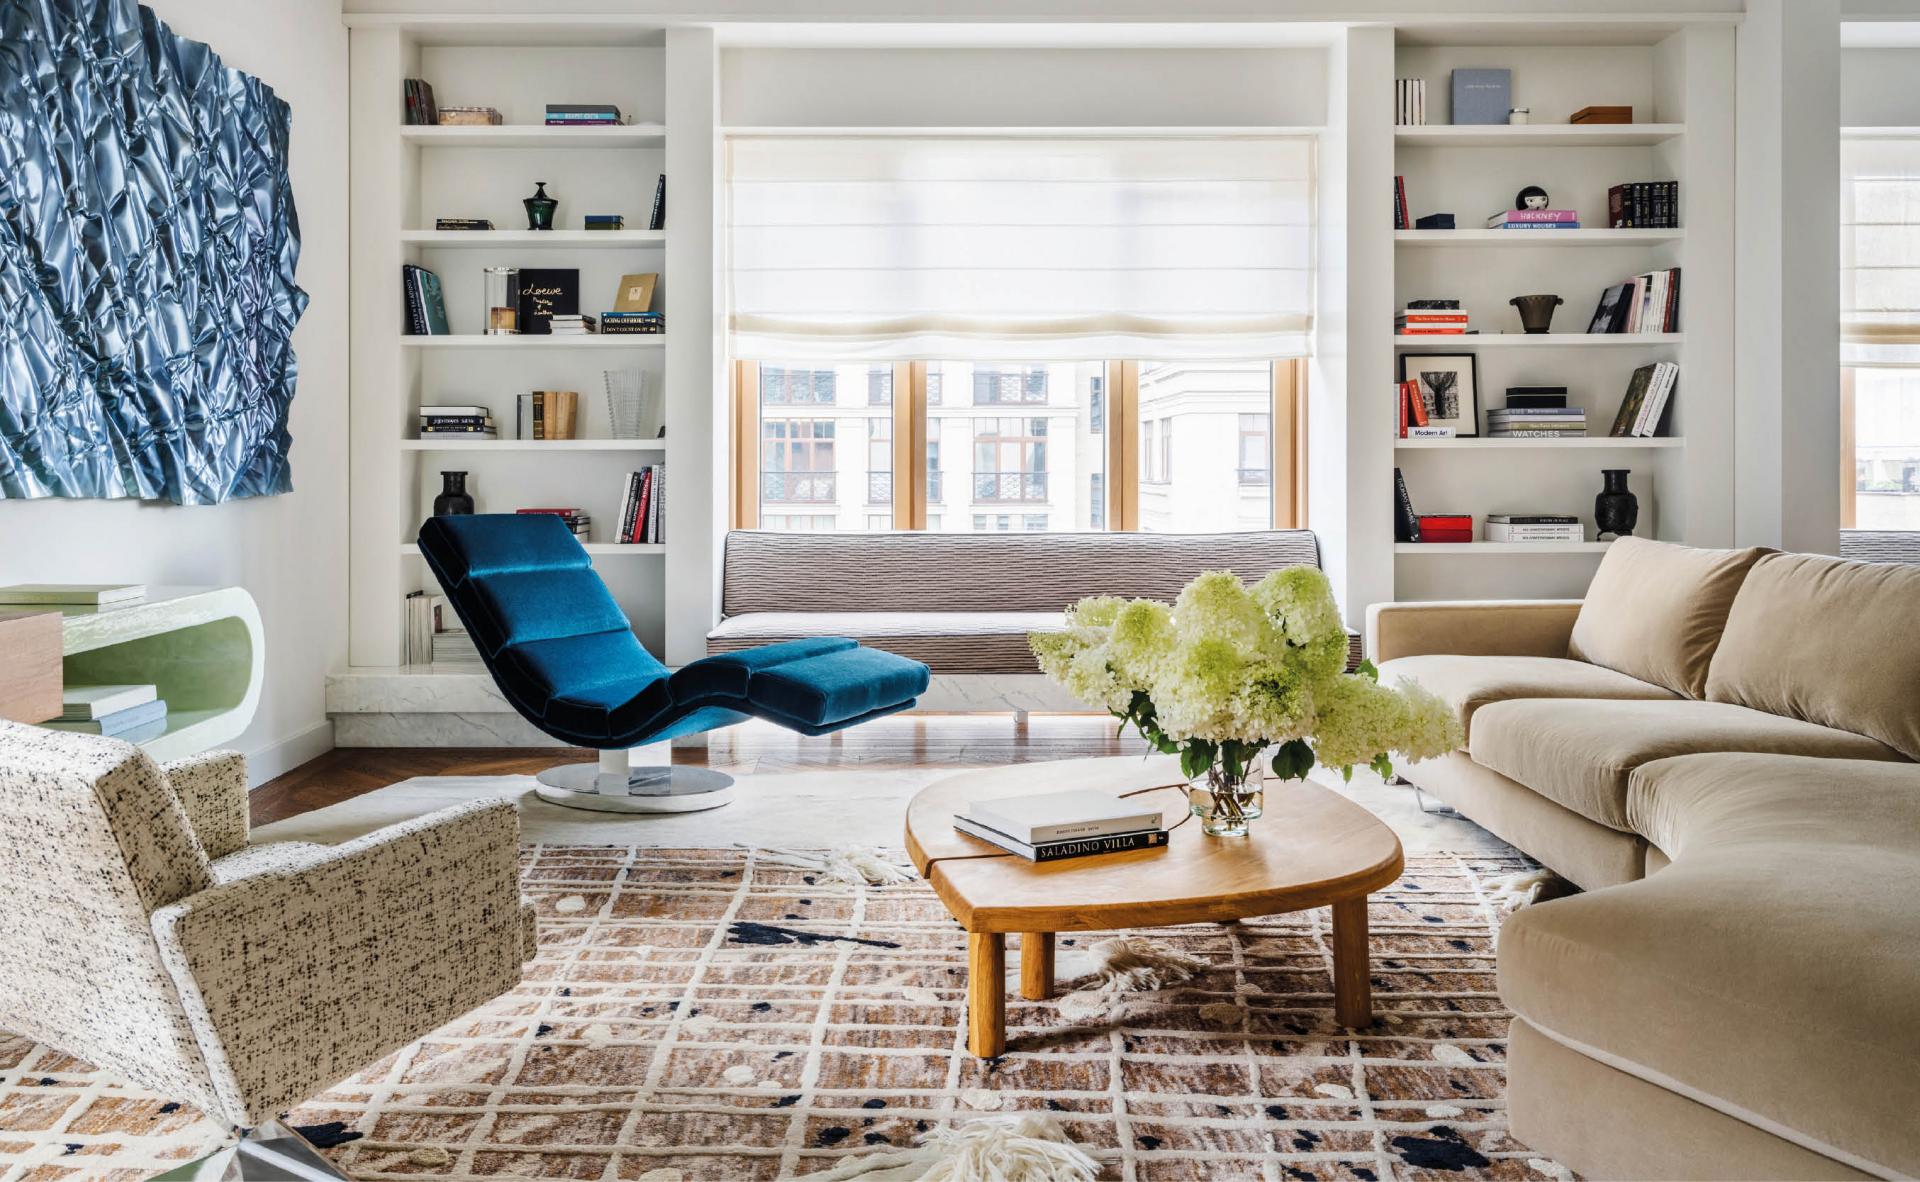 This Dramatic Family Apartment is a Designer's Labour of Love